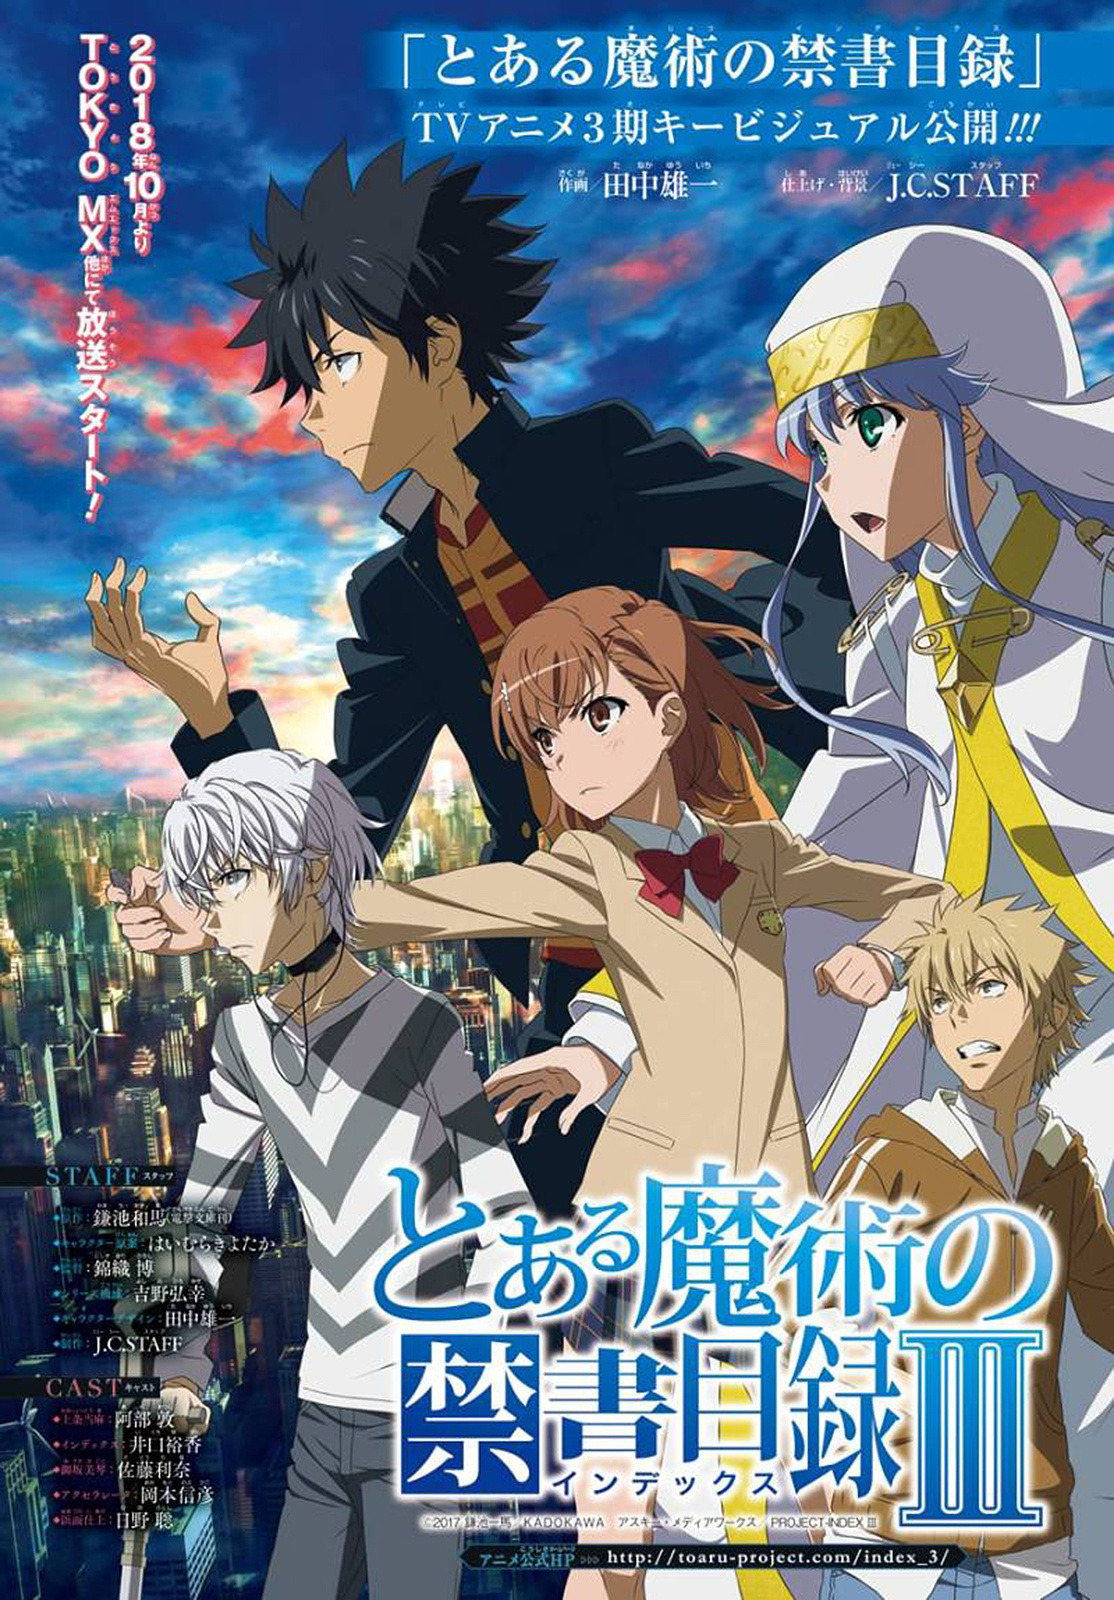 The first âToaru Majutsu no Indexâ S3 anime key visual has been unveiled. Its broadcast will premiere in October (J.C.Staff)